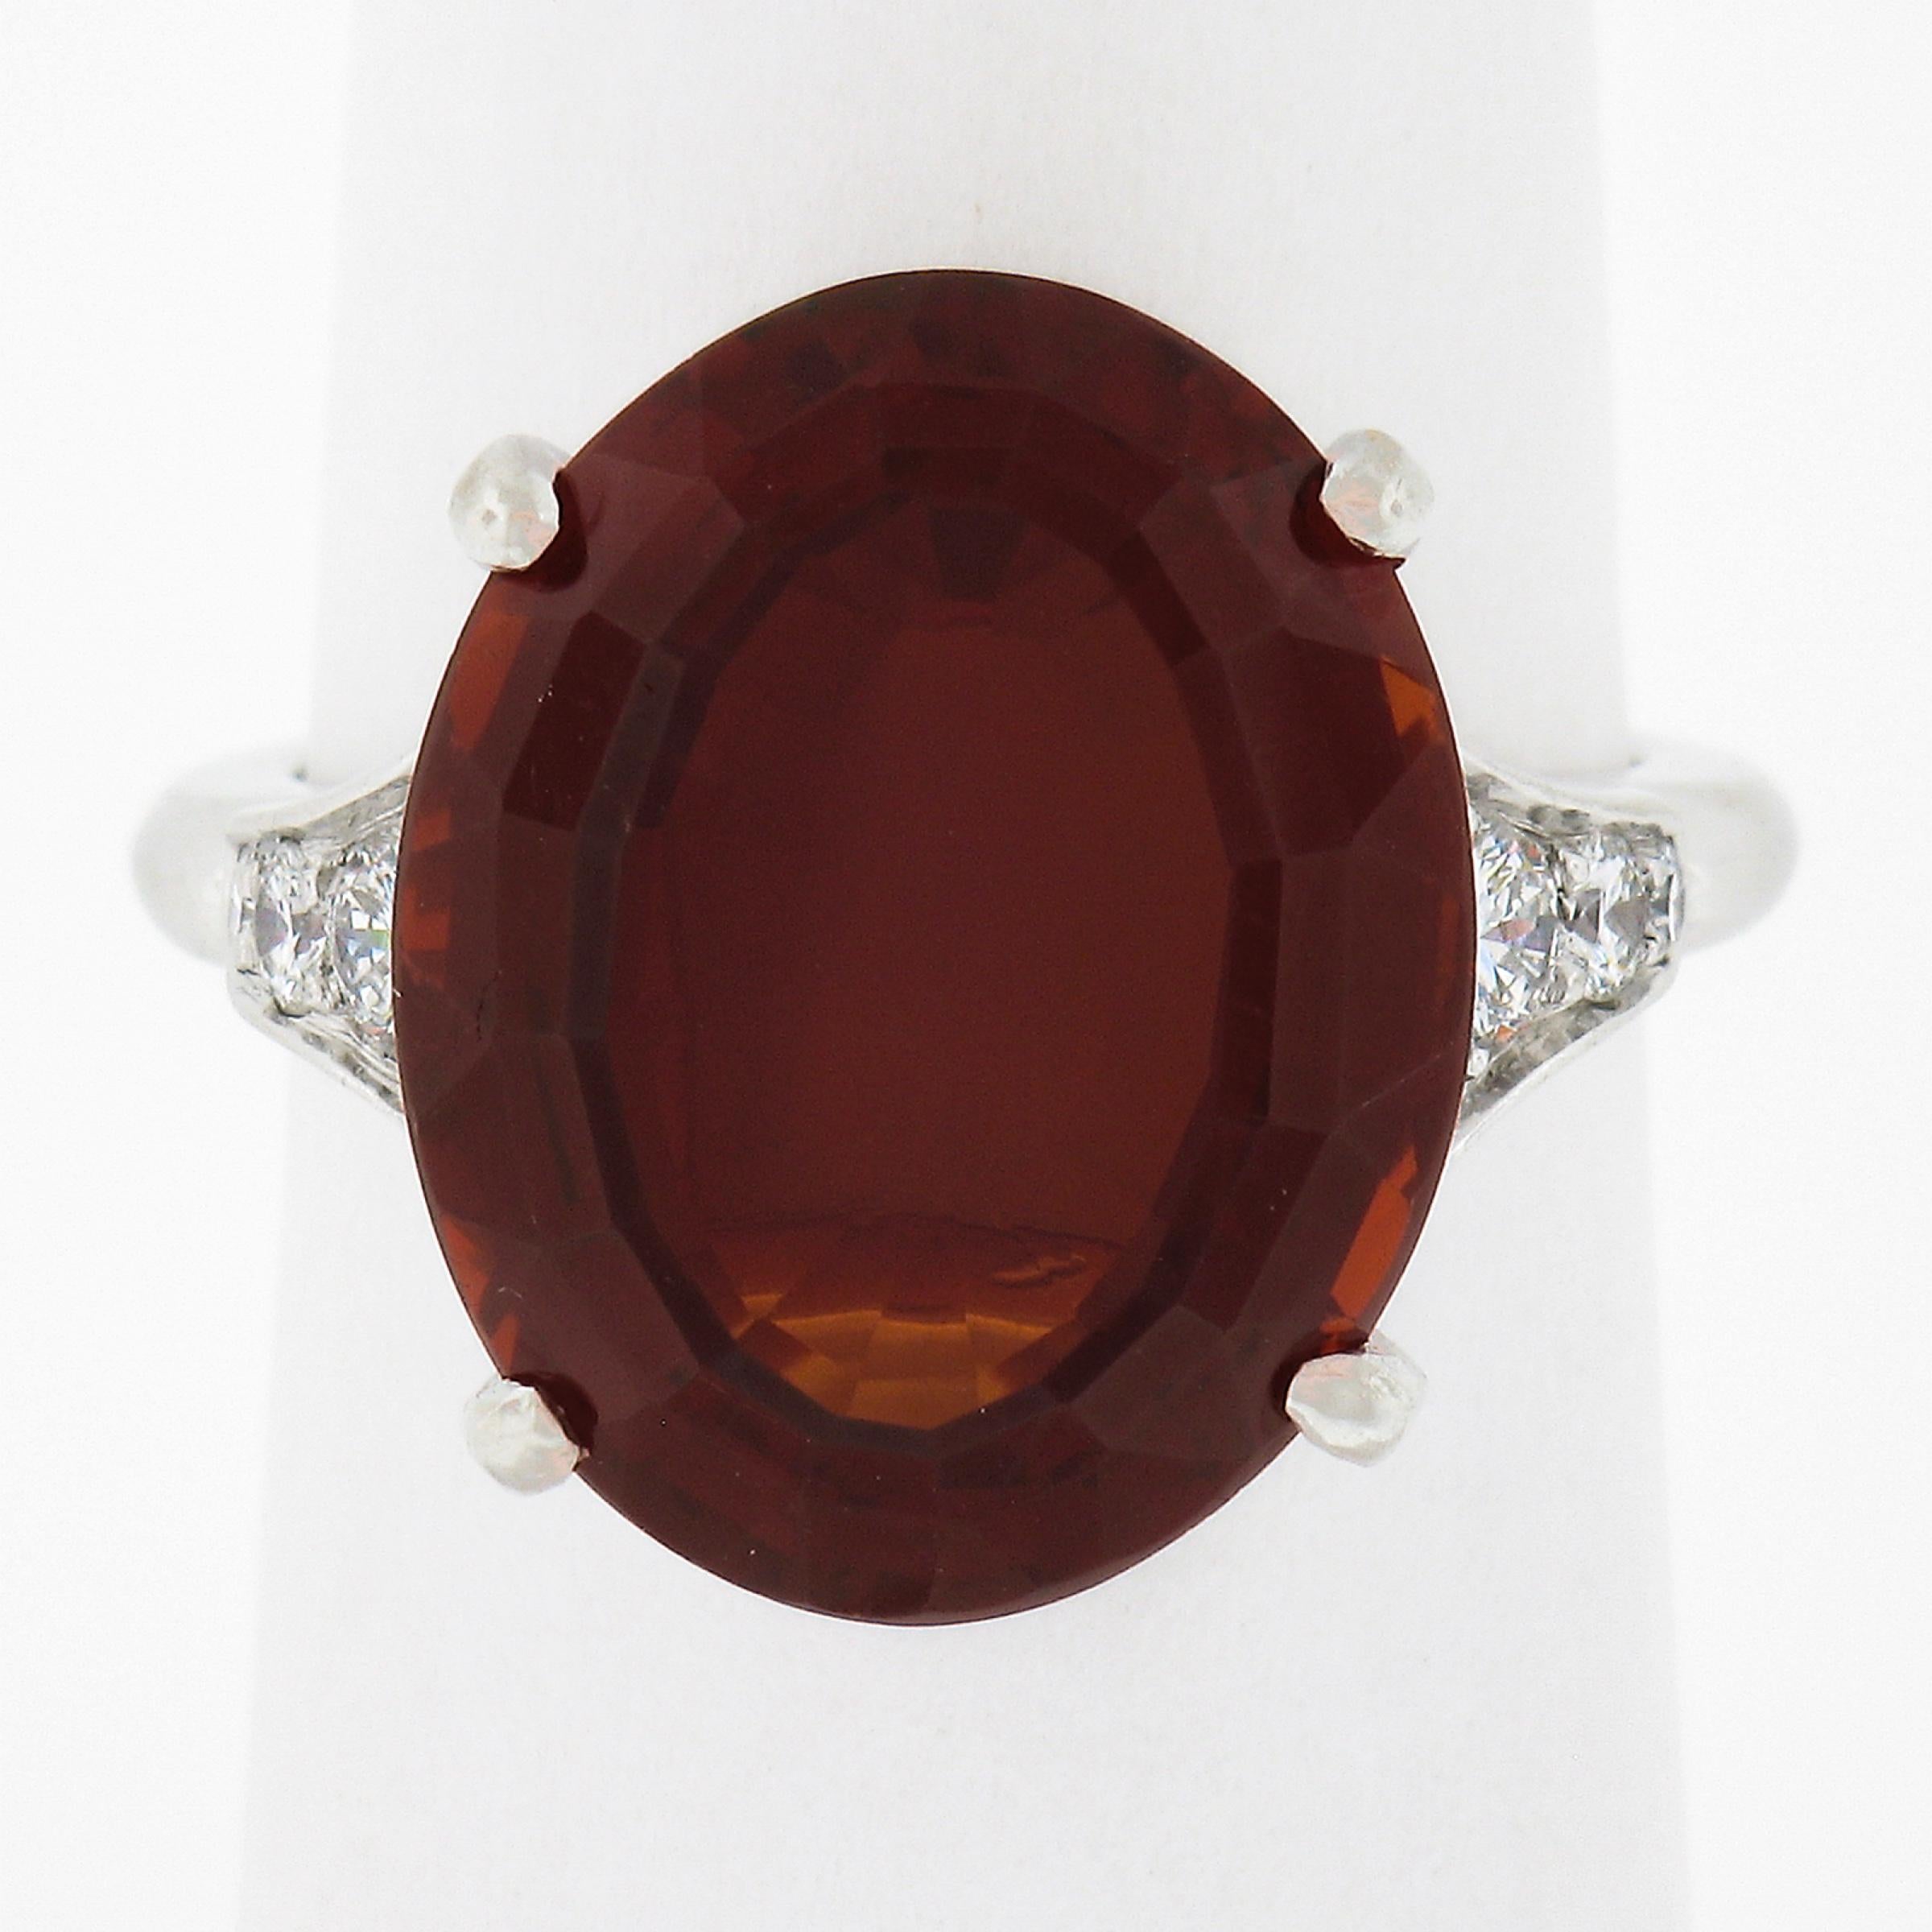 This gorgeous solitaire cocktail ring is crafted in solid platinum and features a top quality and rare oval step cut natural madeira citrine that is neatly set at the center displaying a beautiful and rich red orange color with remarkable amount of